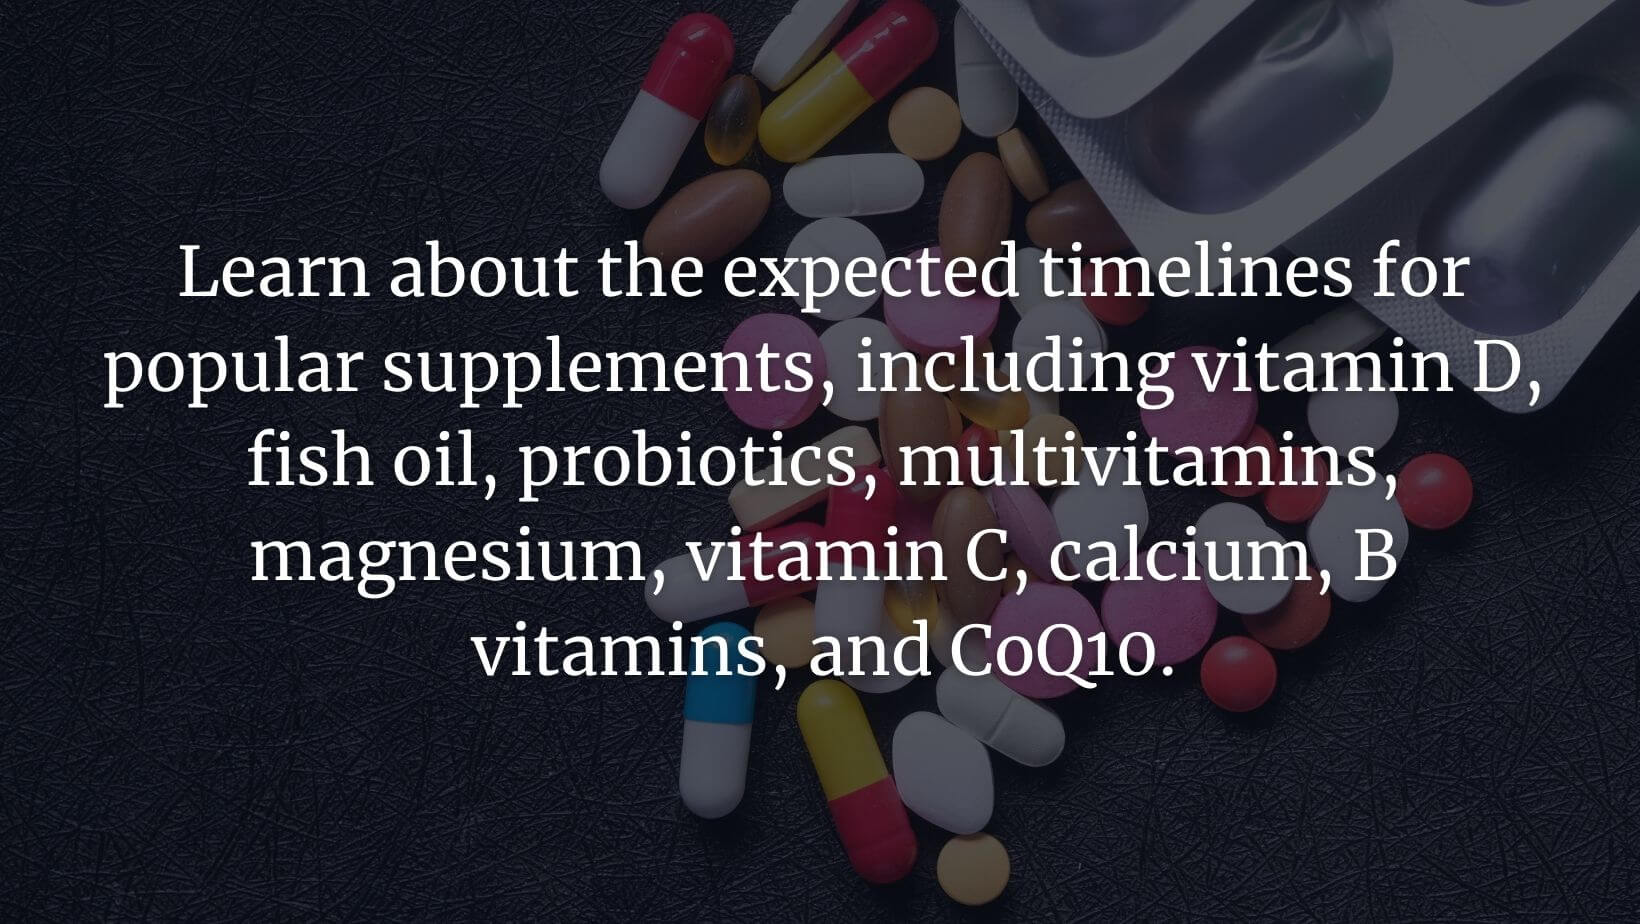 Timelines for popular supplements featured text image